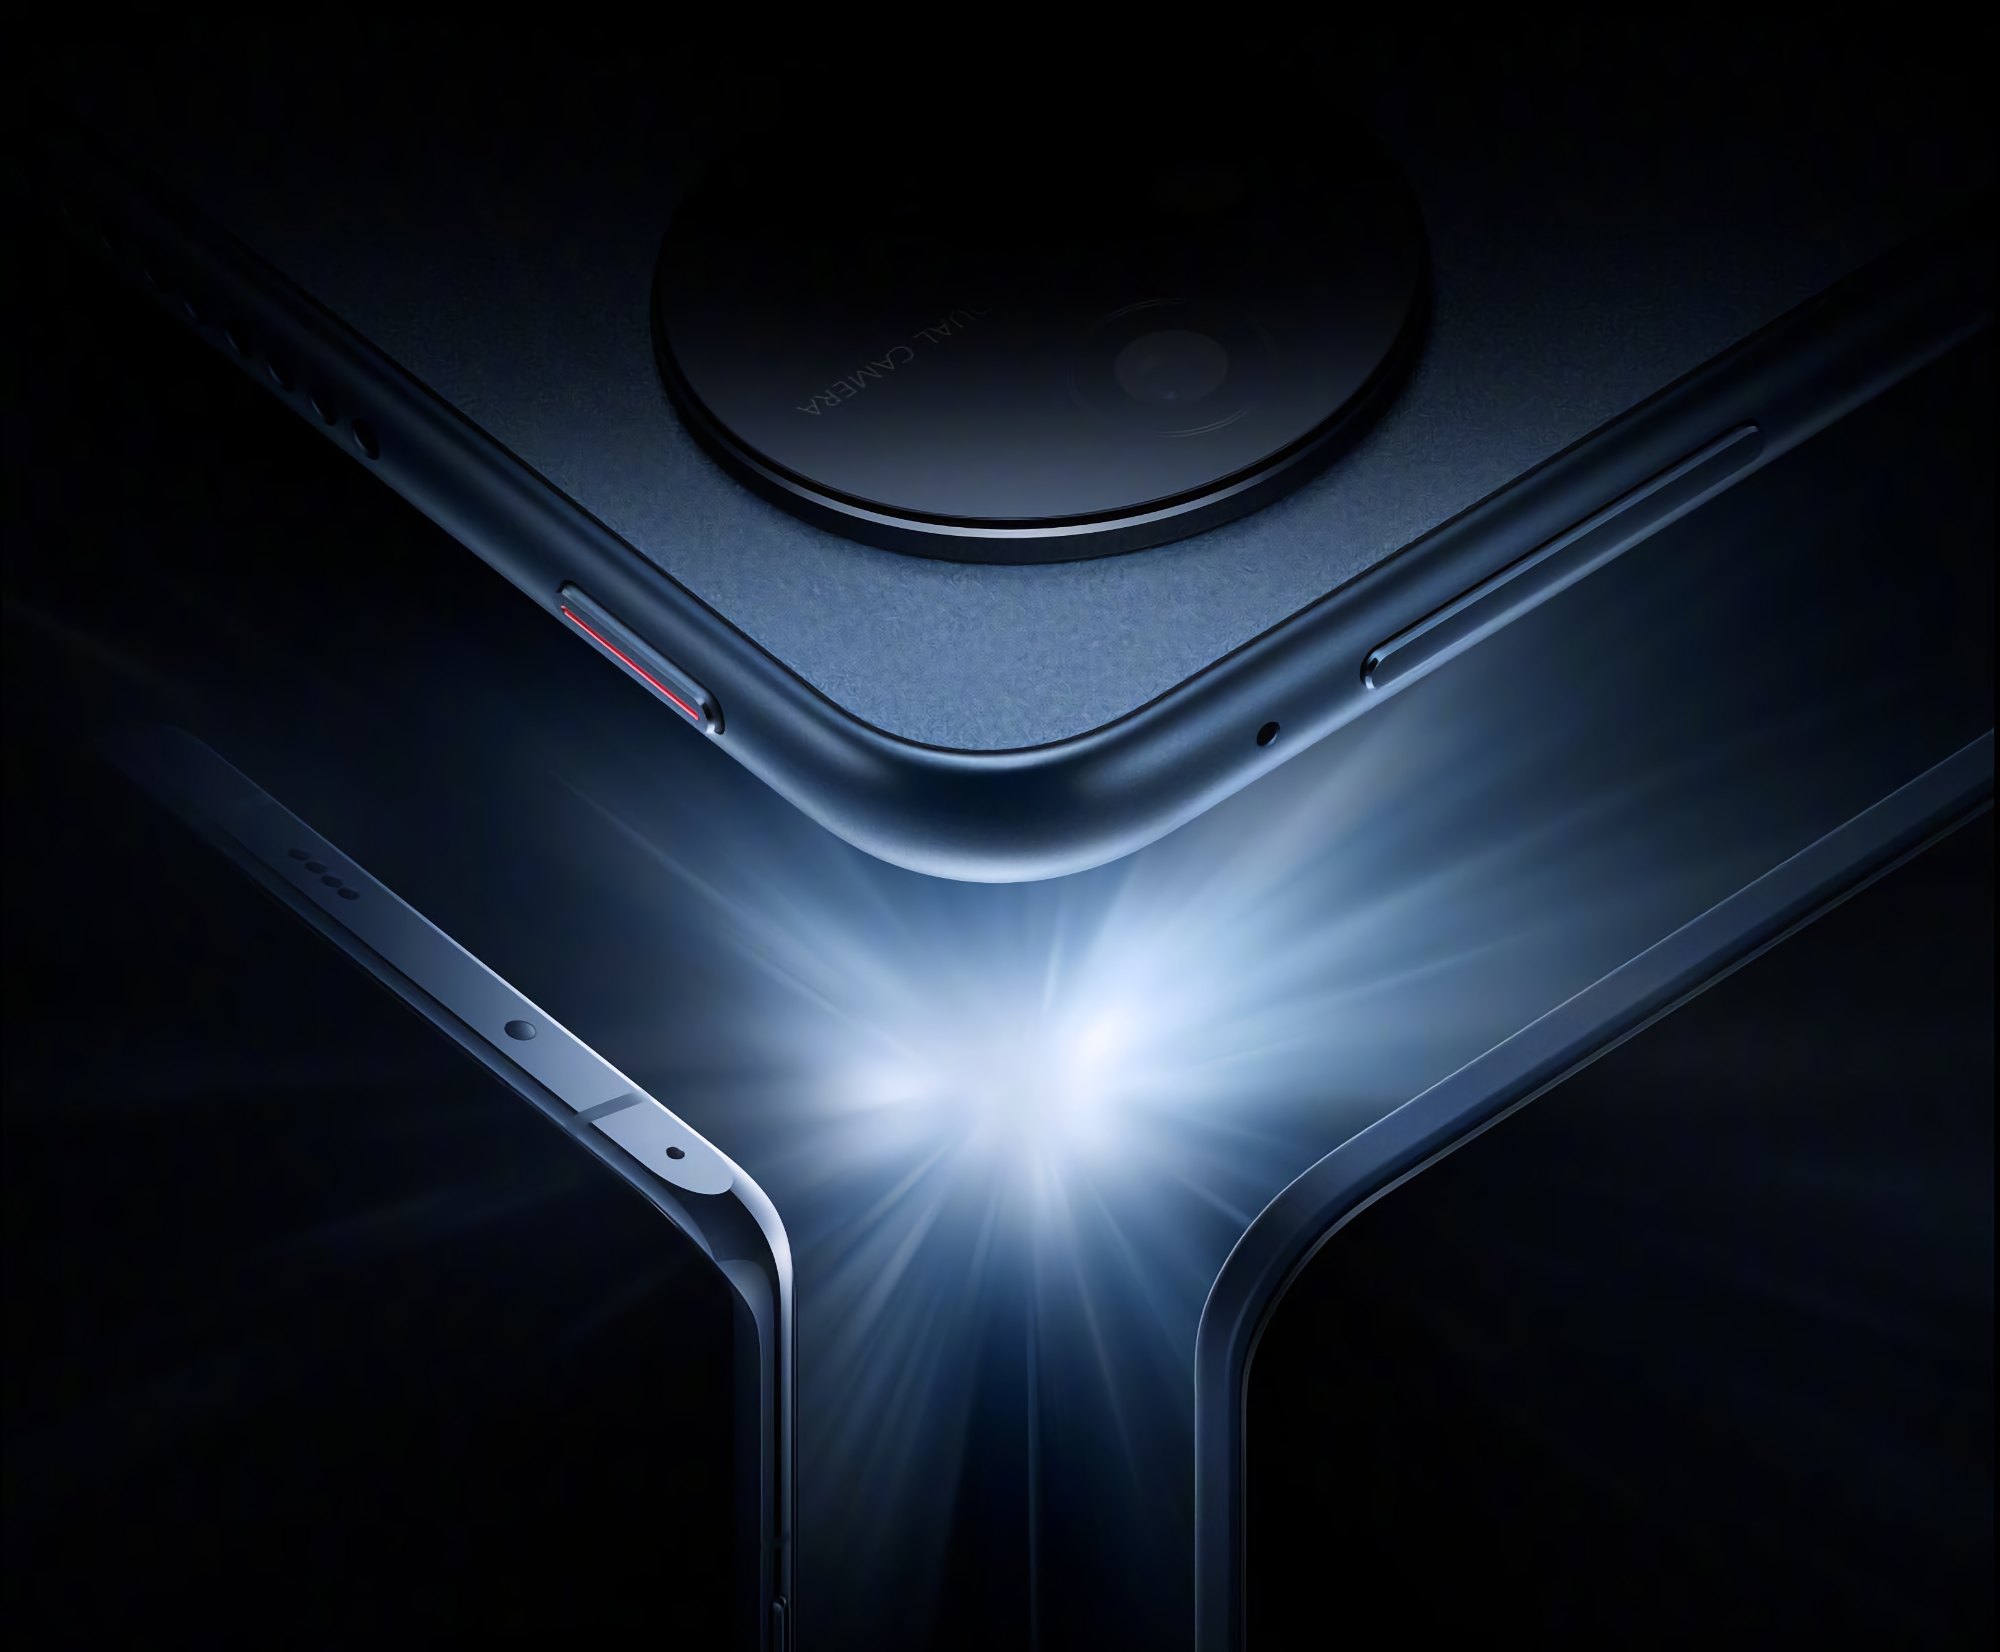 Huawei will unveil the flagship MatePad Pro 11 tablet on July 27